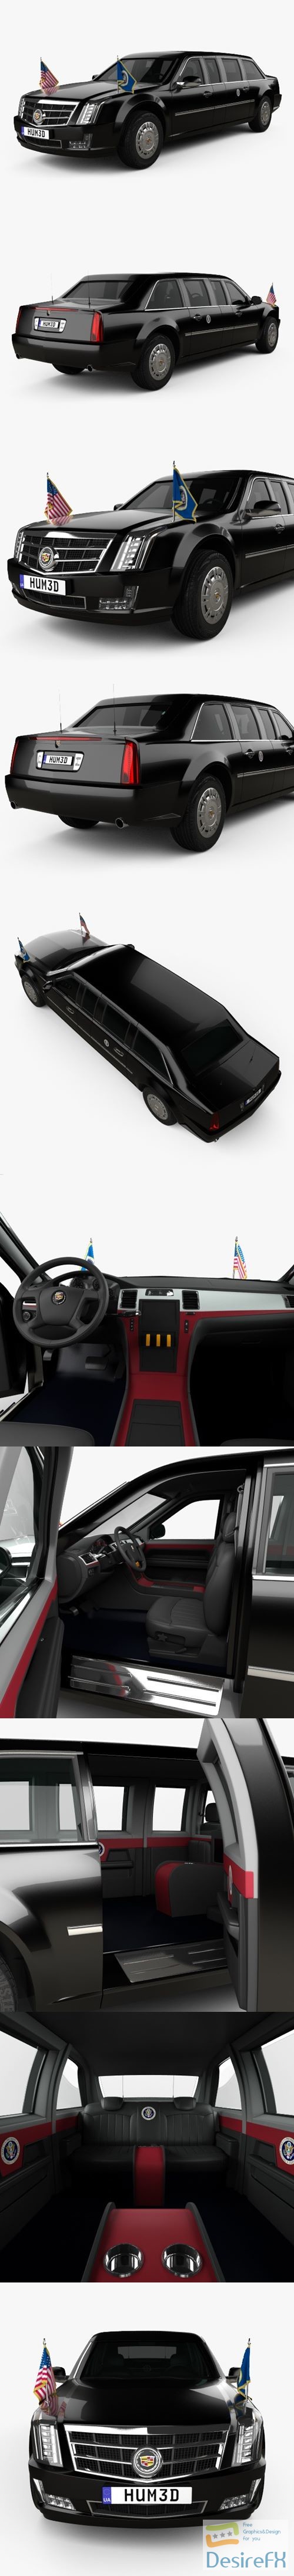 Cadillac US Presidential State Car with HQ interior 2017 3D Model